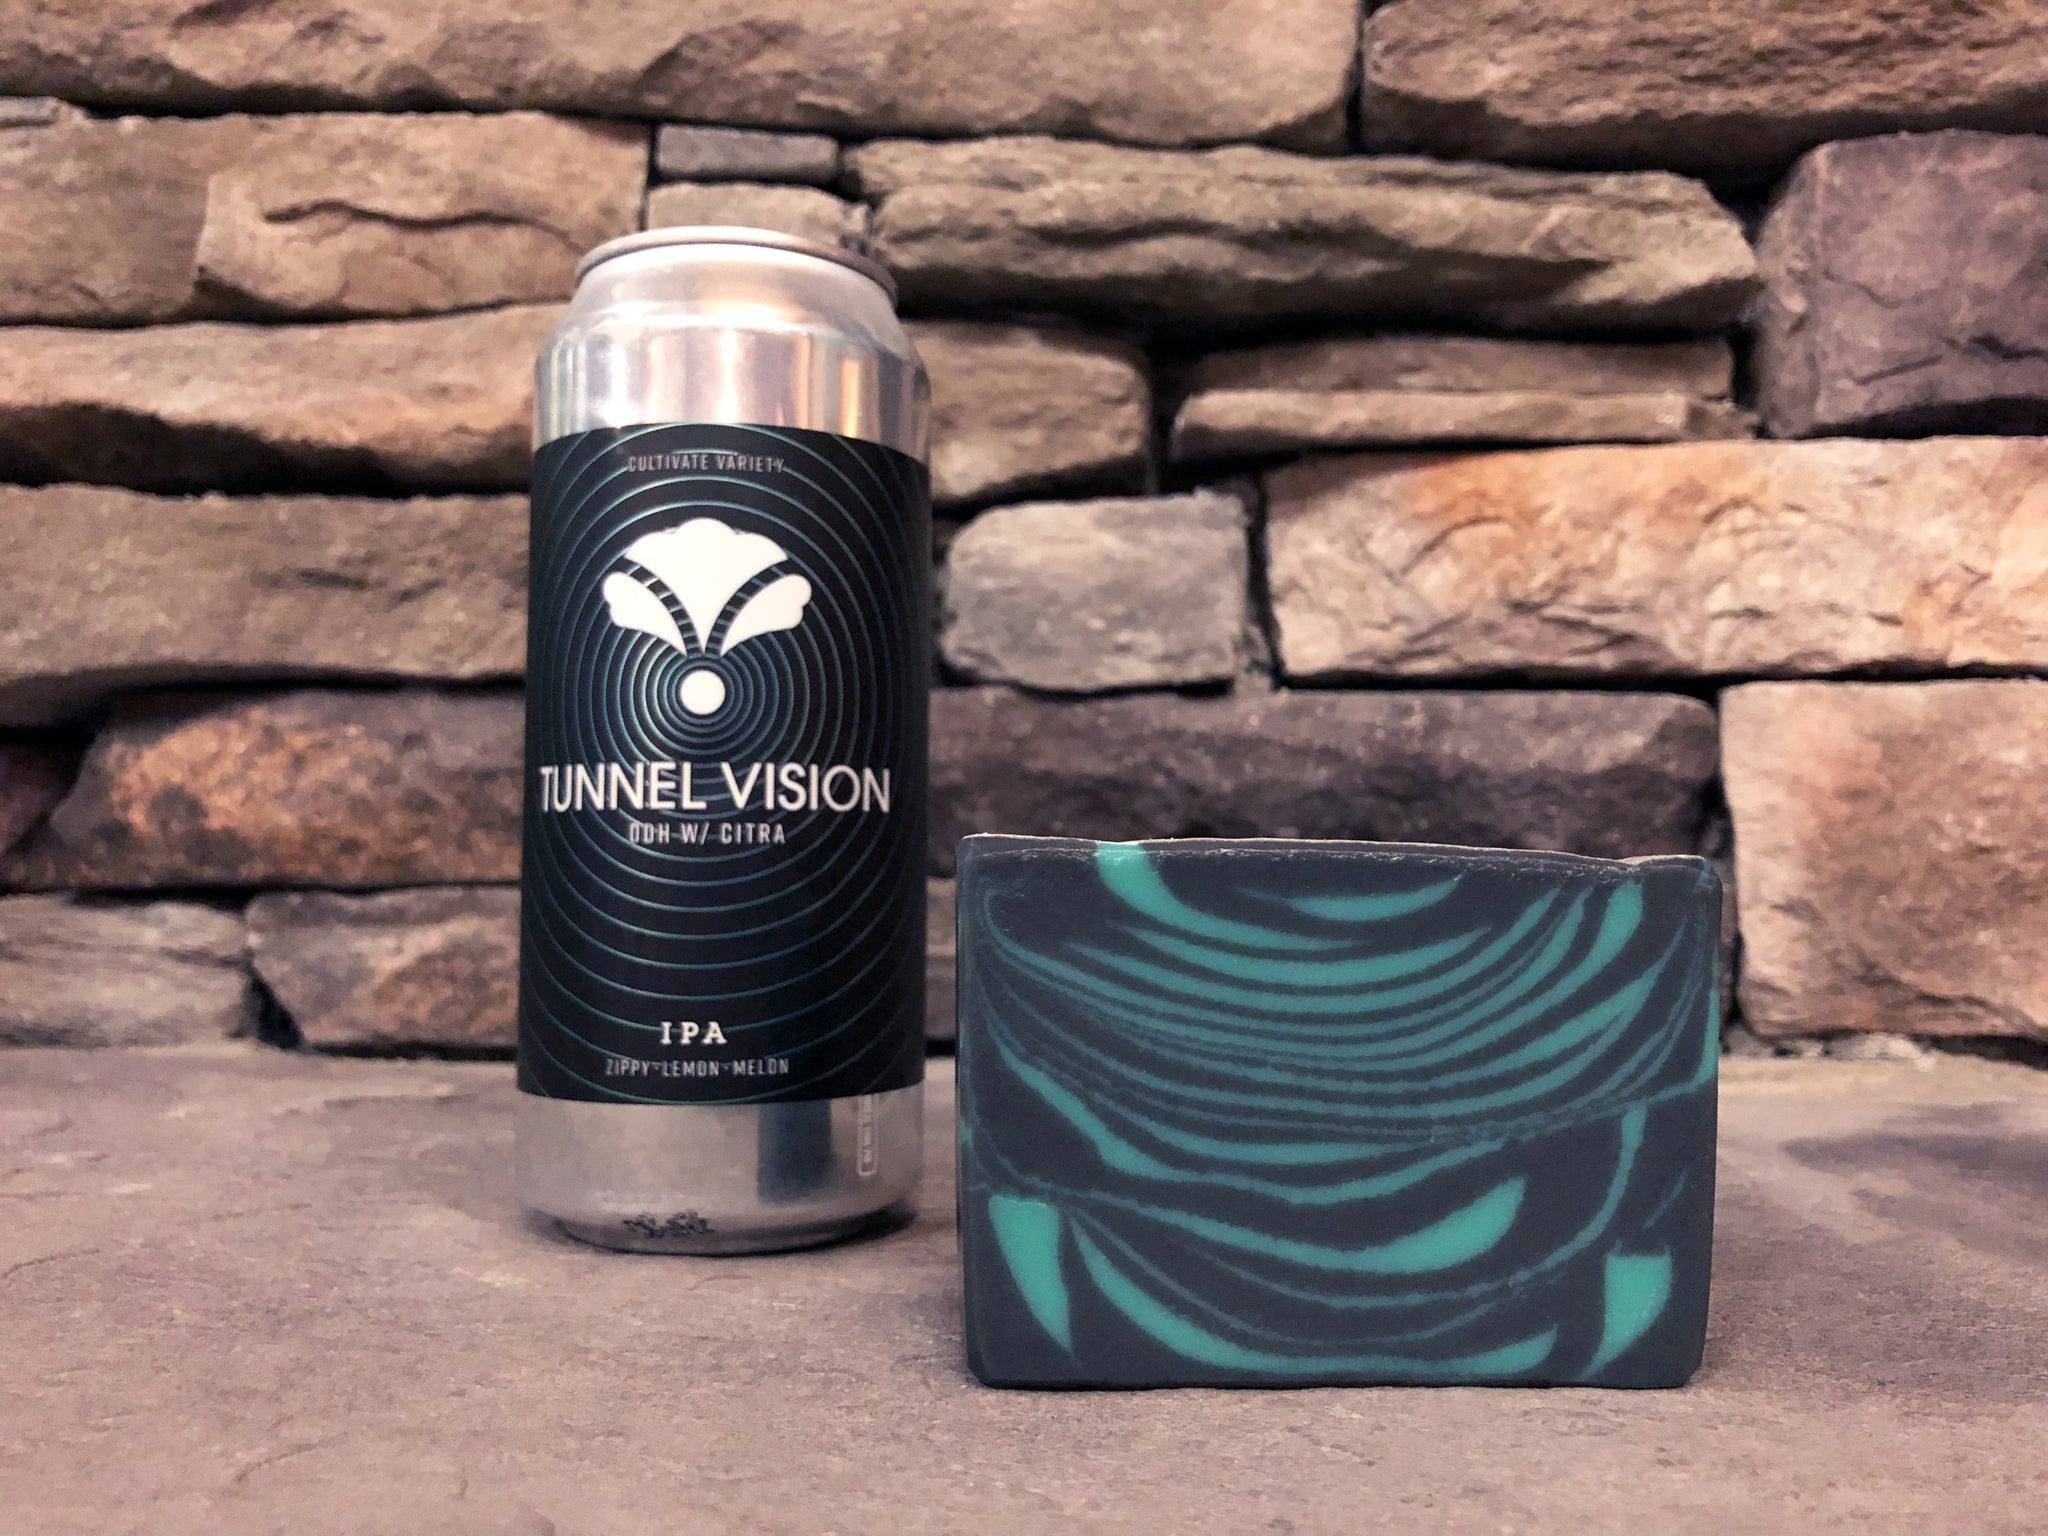 Tennessee beer soap handcrafted with tunnel vision ddh ipa Tennessee craft beer from bearded iris brewing craft brewery in Nashville Tennessee brewery black and teal striped beer soap for him with activated charcoal beer soap for sale by spunkndisorderly craft beer soaps